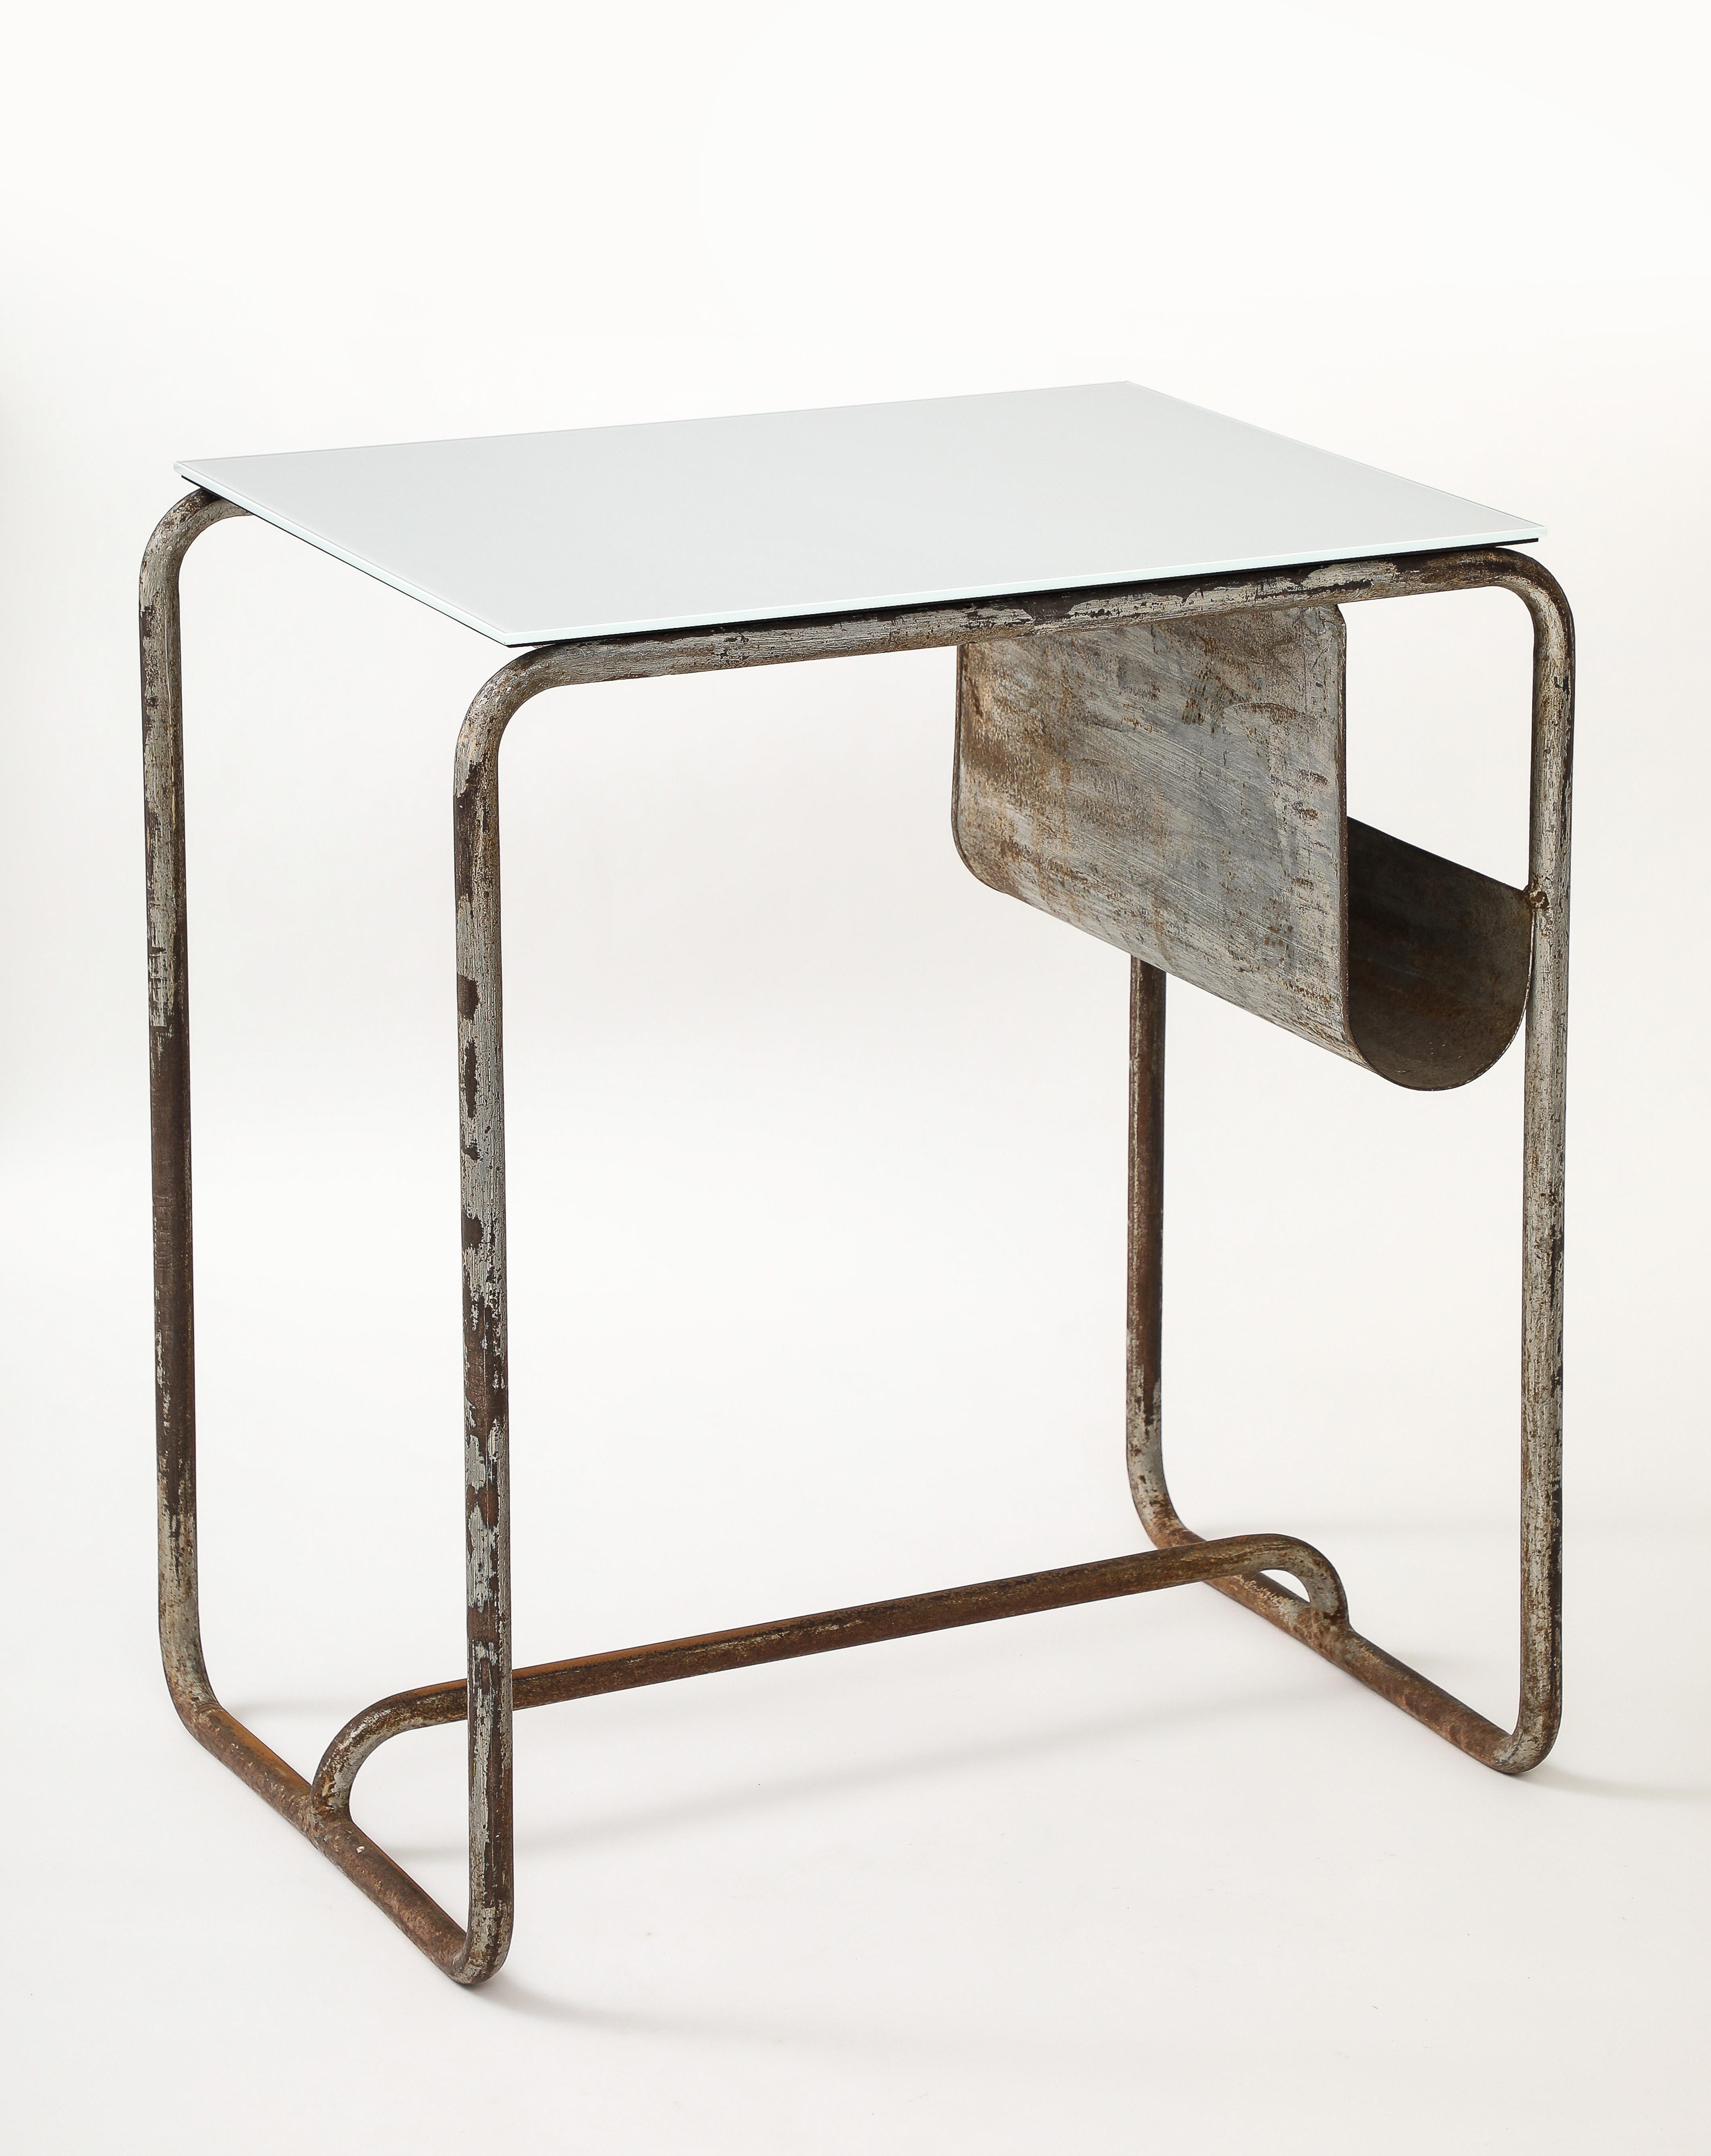 French Early Modernist Desk Side Table, Nickel Patina, Opaline Top, France, c. 1920 For Sale